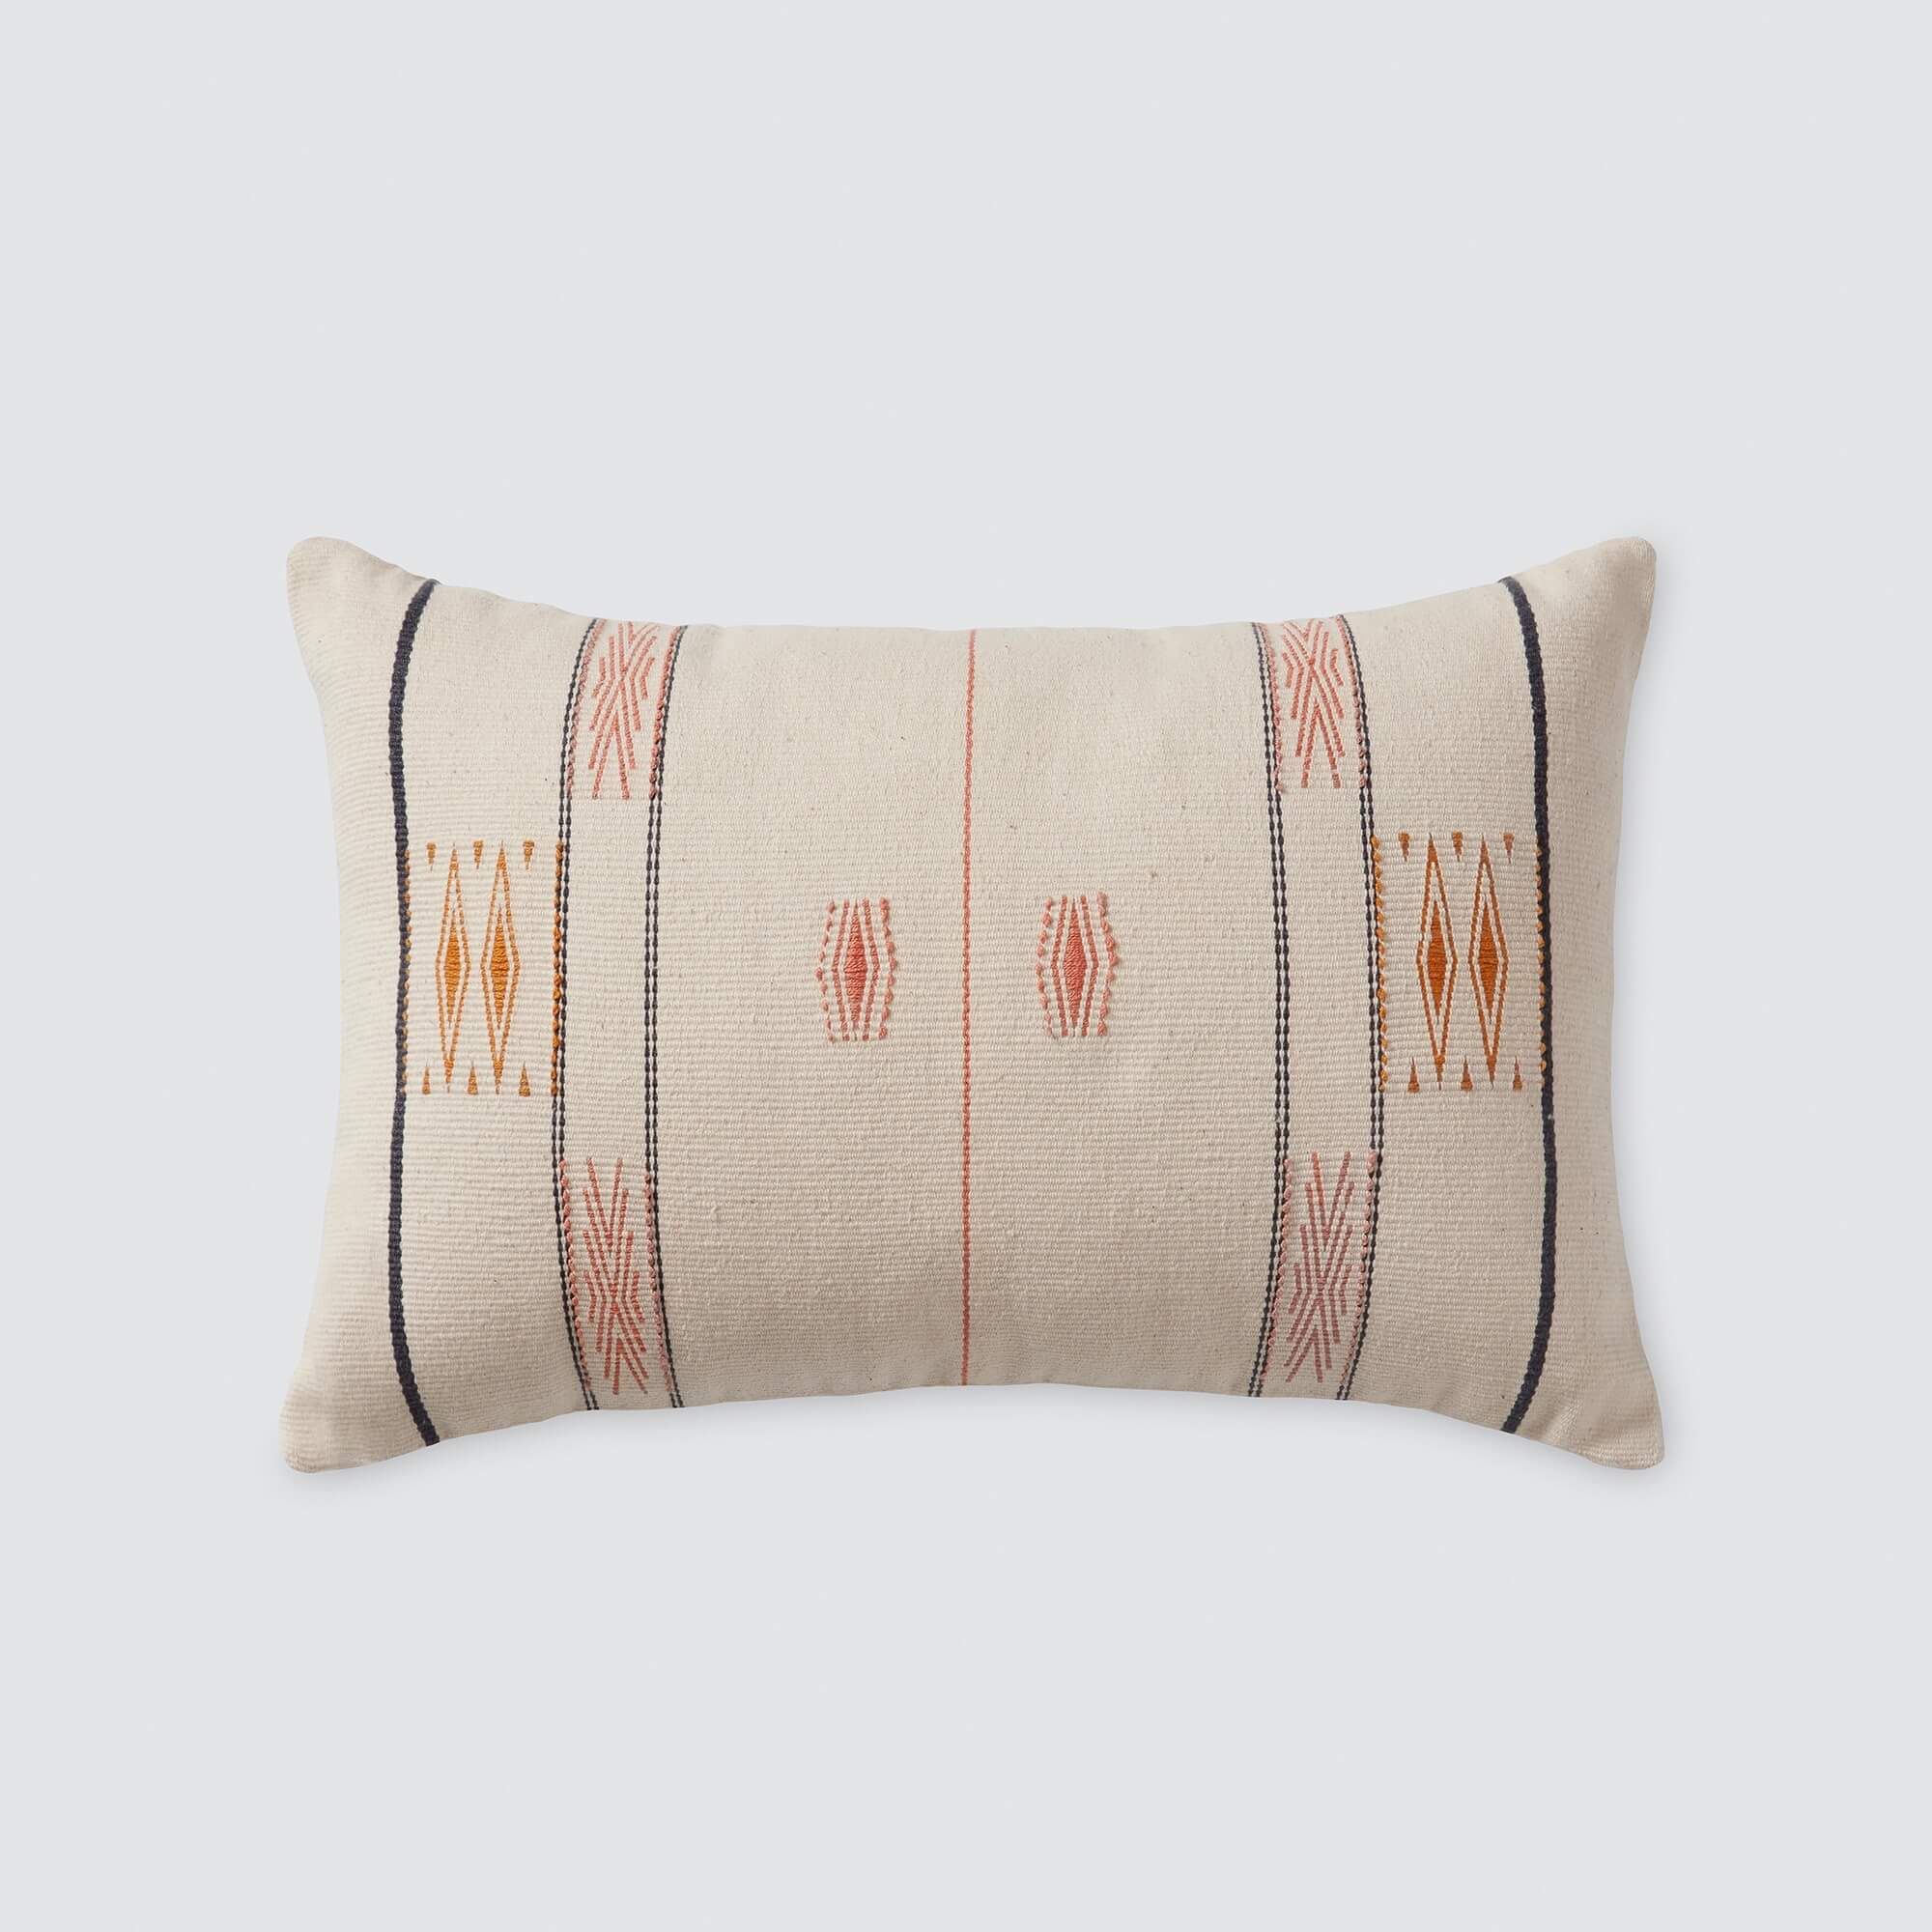 Sumi Blush Lumbar Pillow | Modern Design Handcrafted in India   – The Citizenry | The Citizenry